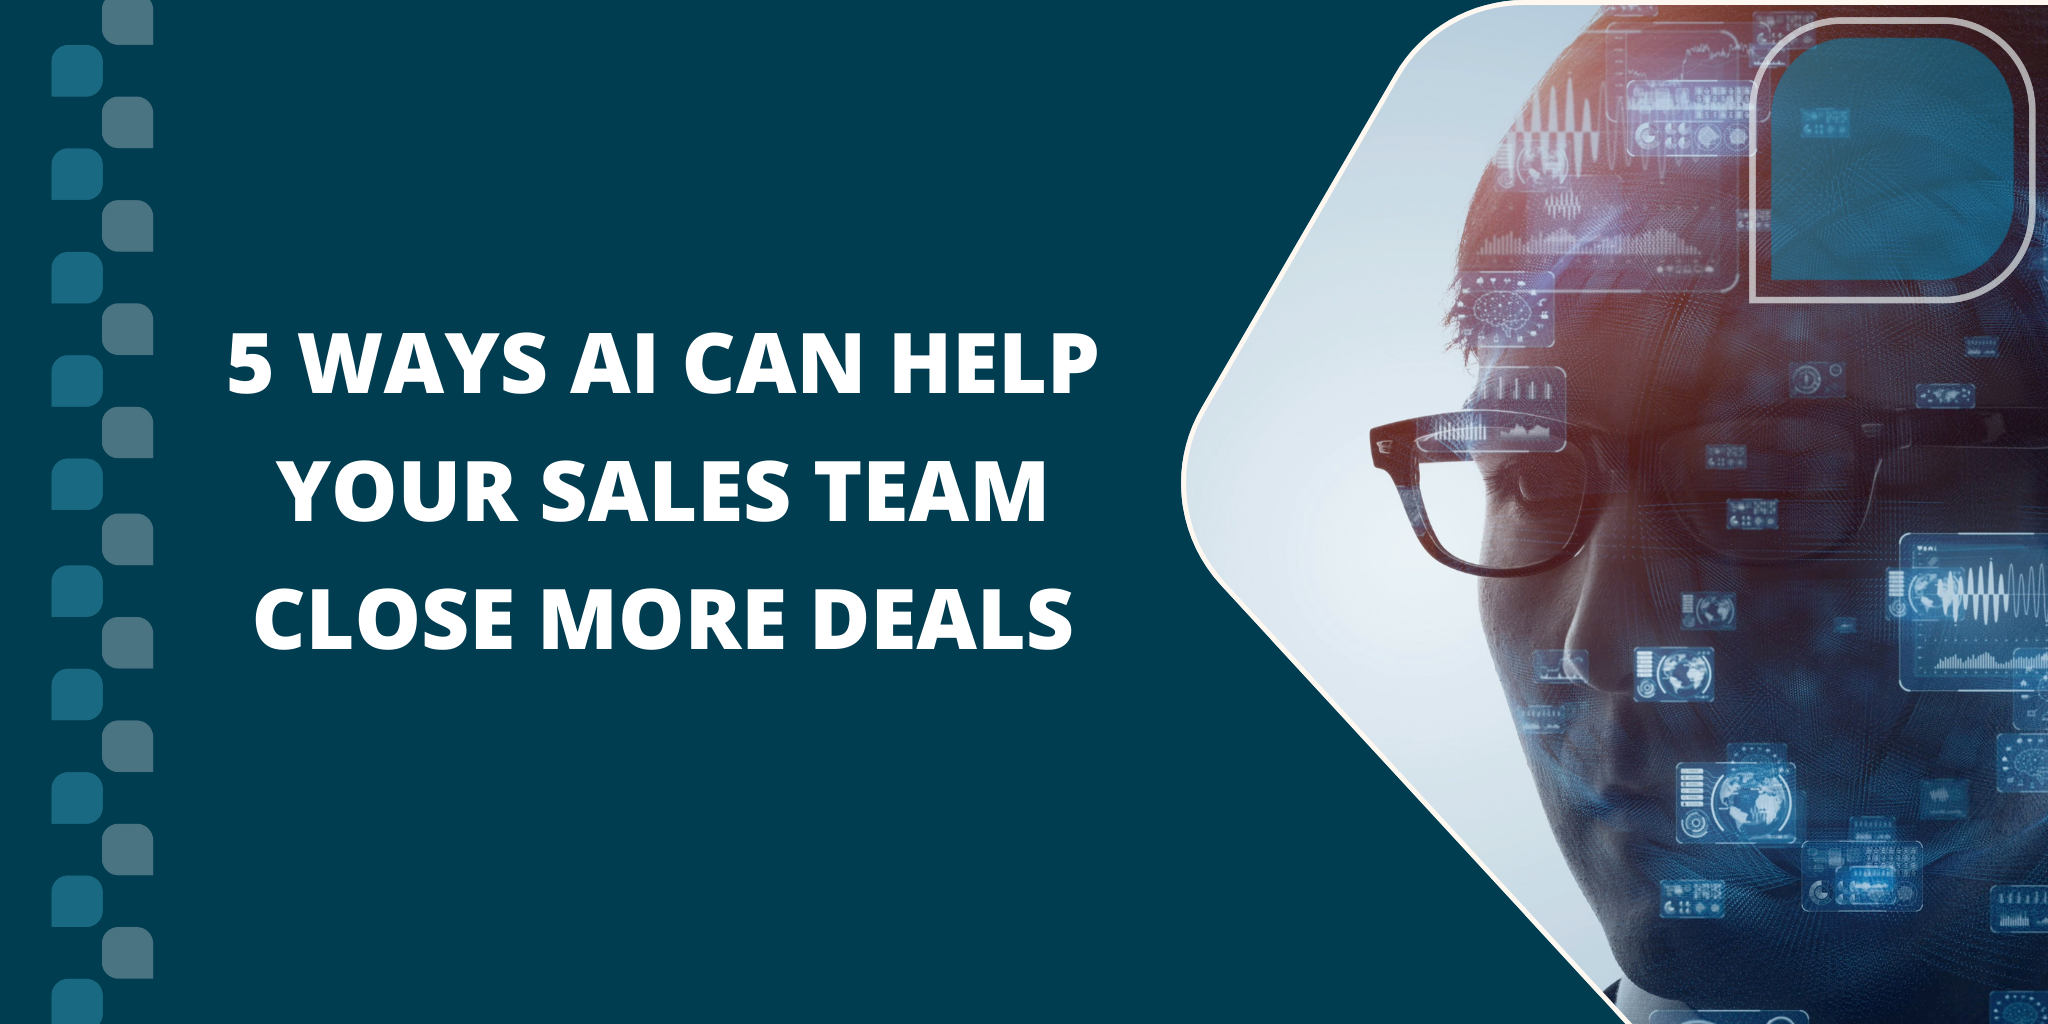 Ways AI Can Help Your Sales Team Close More Deals | Telephones for business